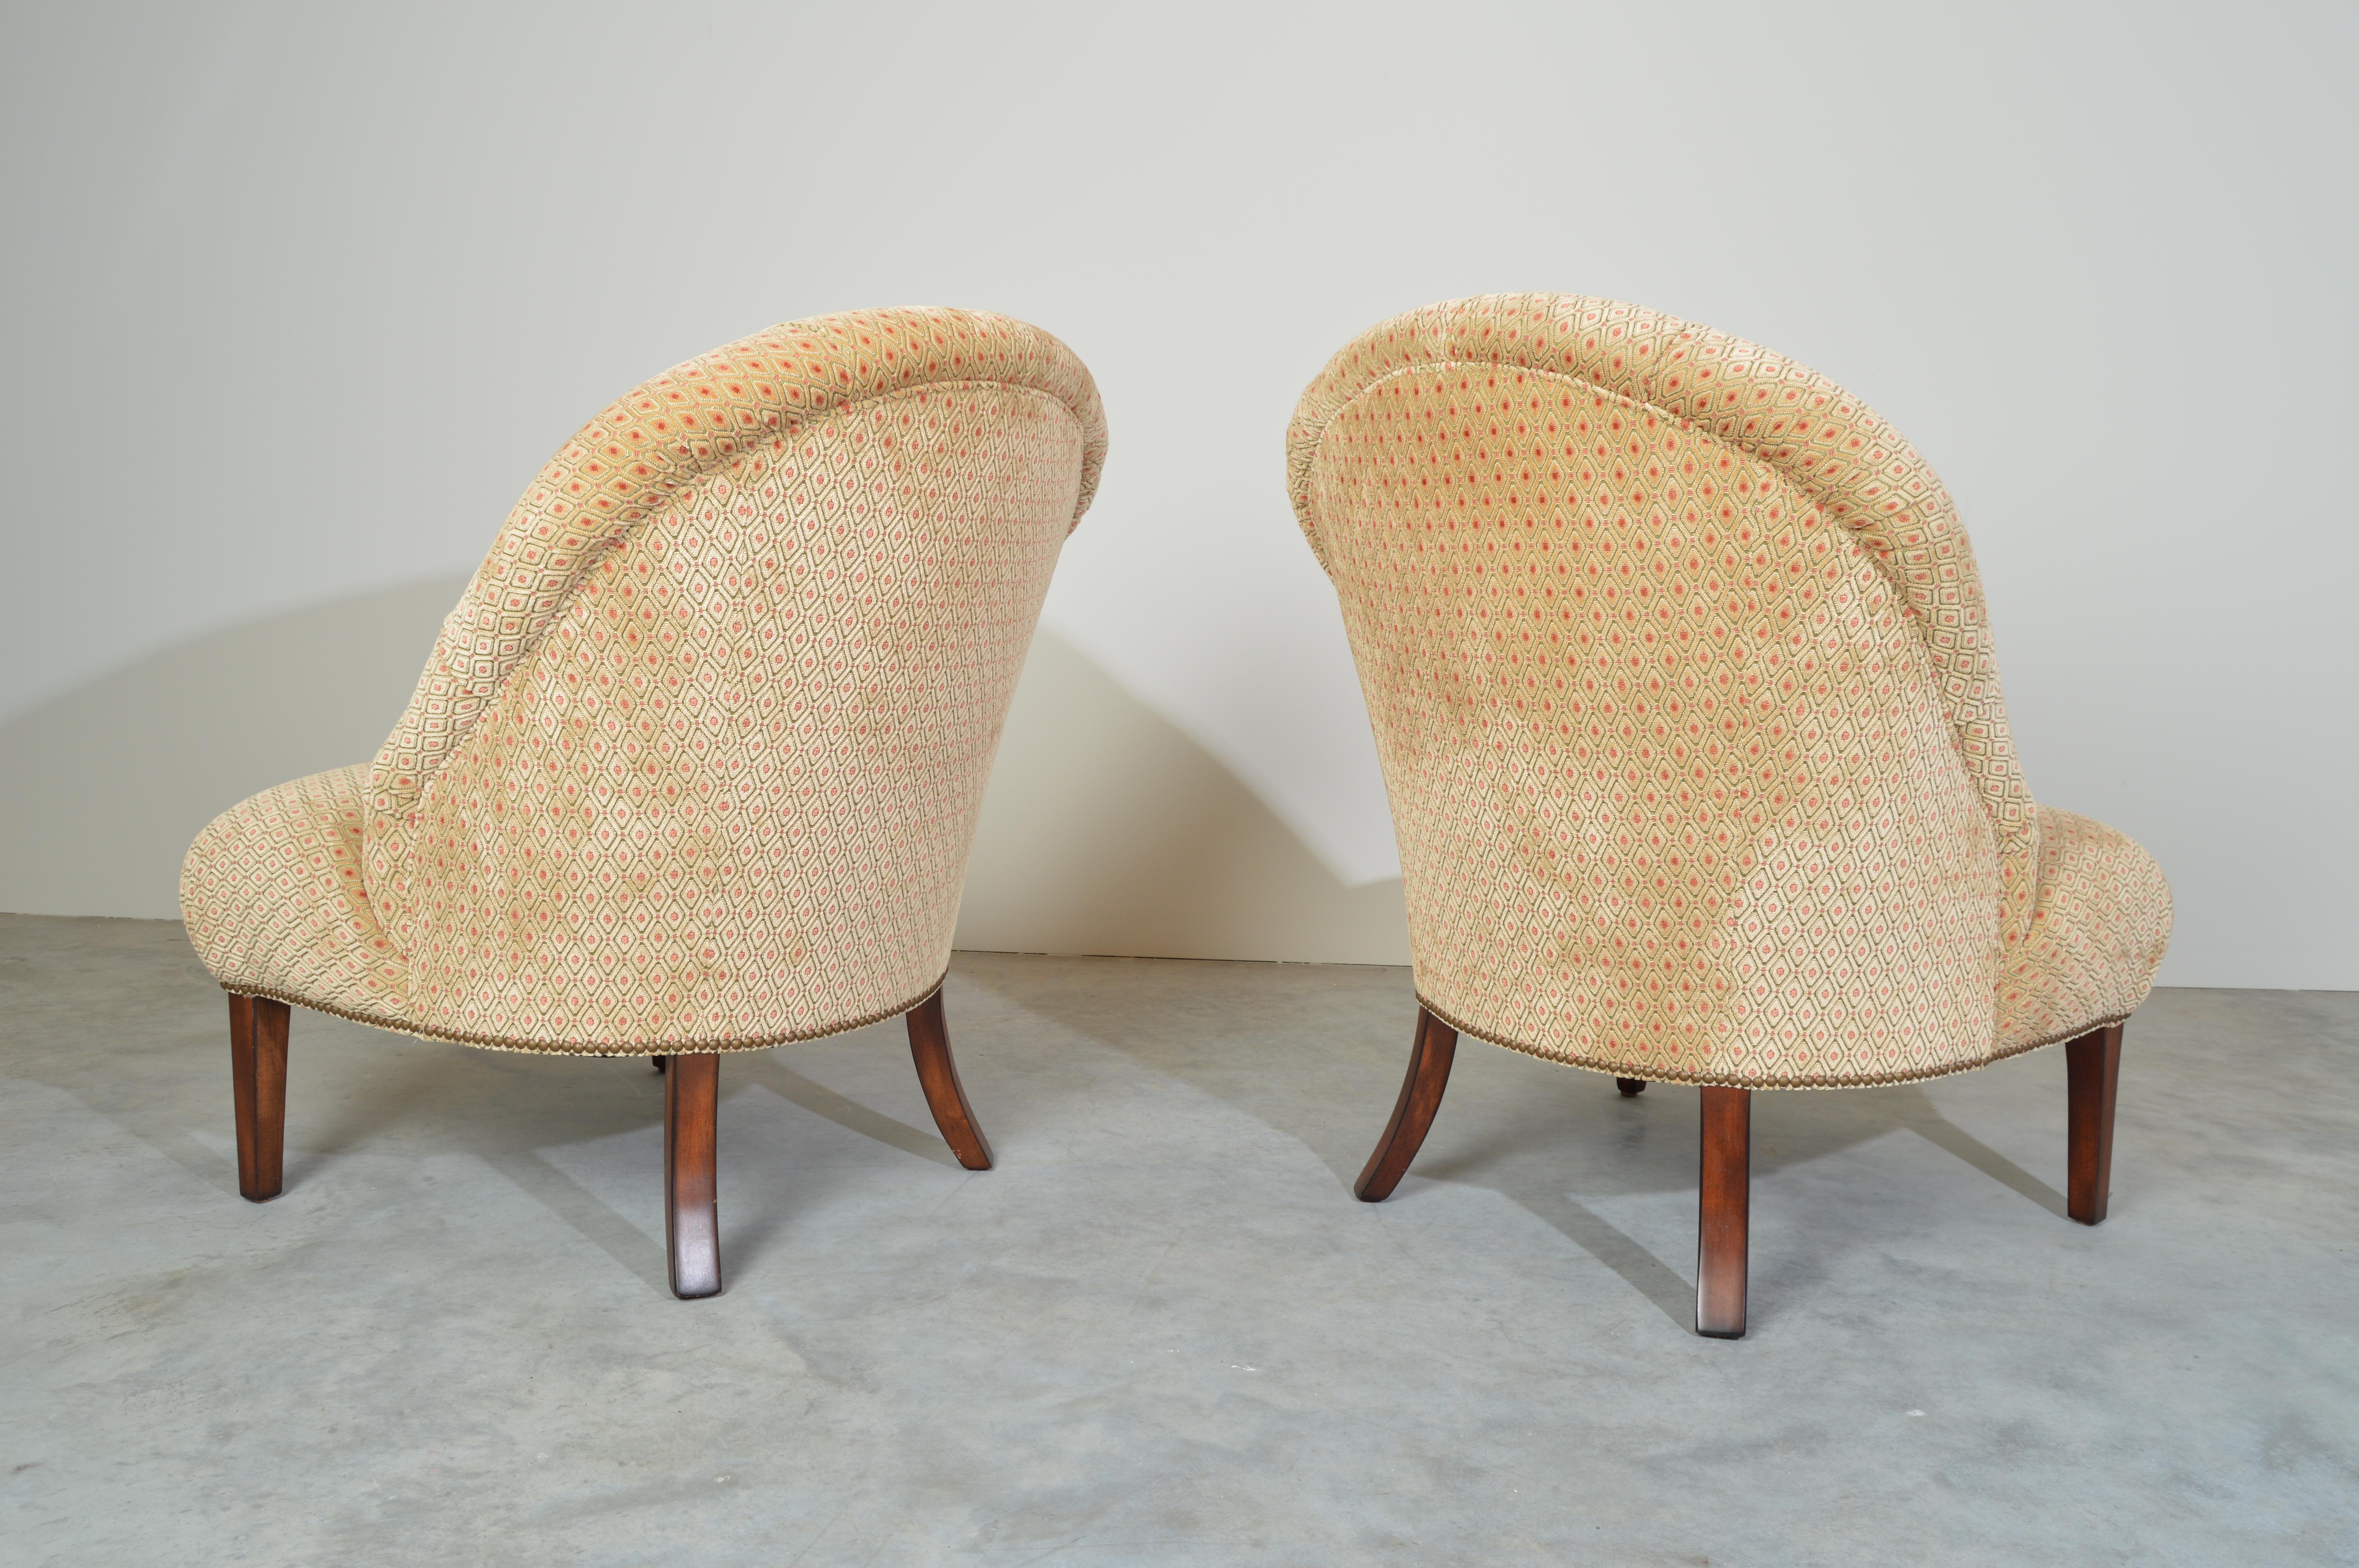 Upholstery American Classical Edward Ferrell Tufted Slipper/Lounge Chairs